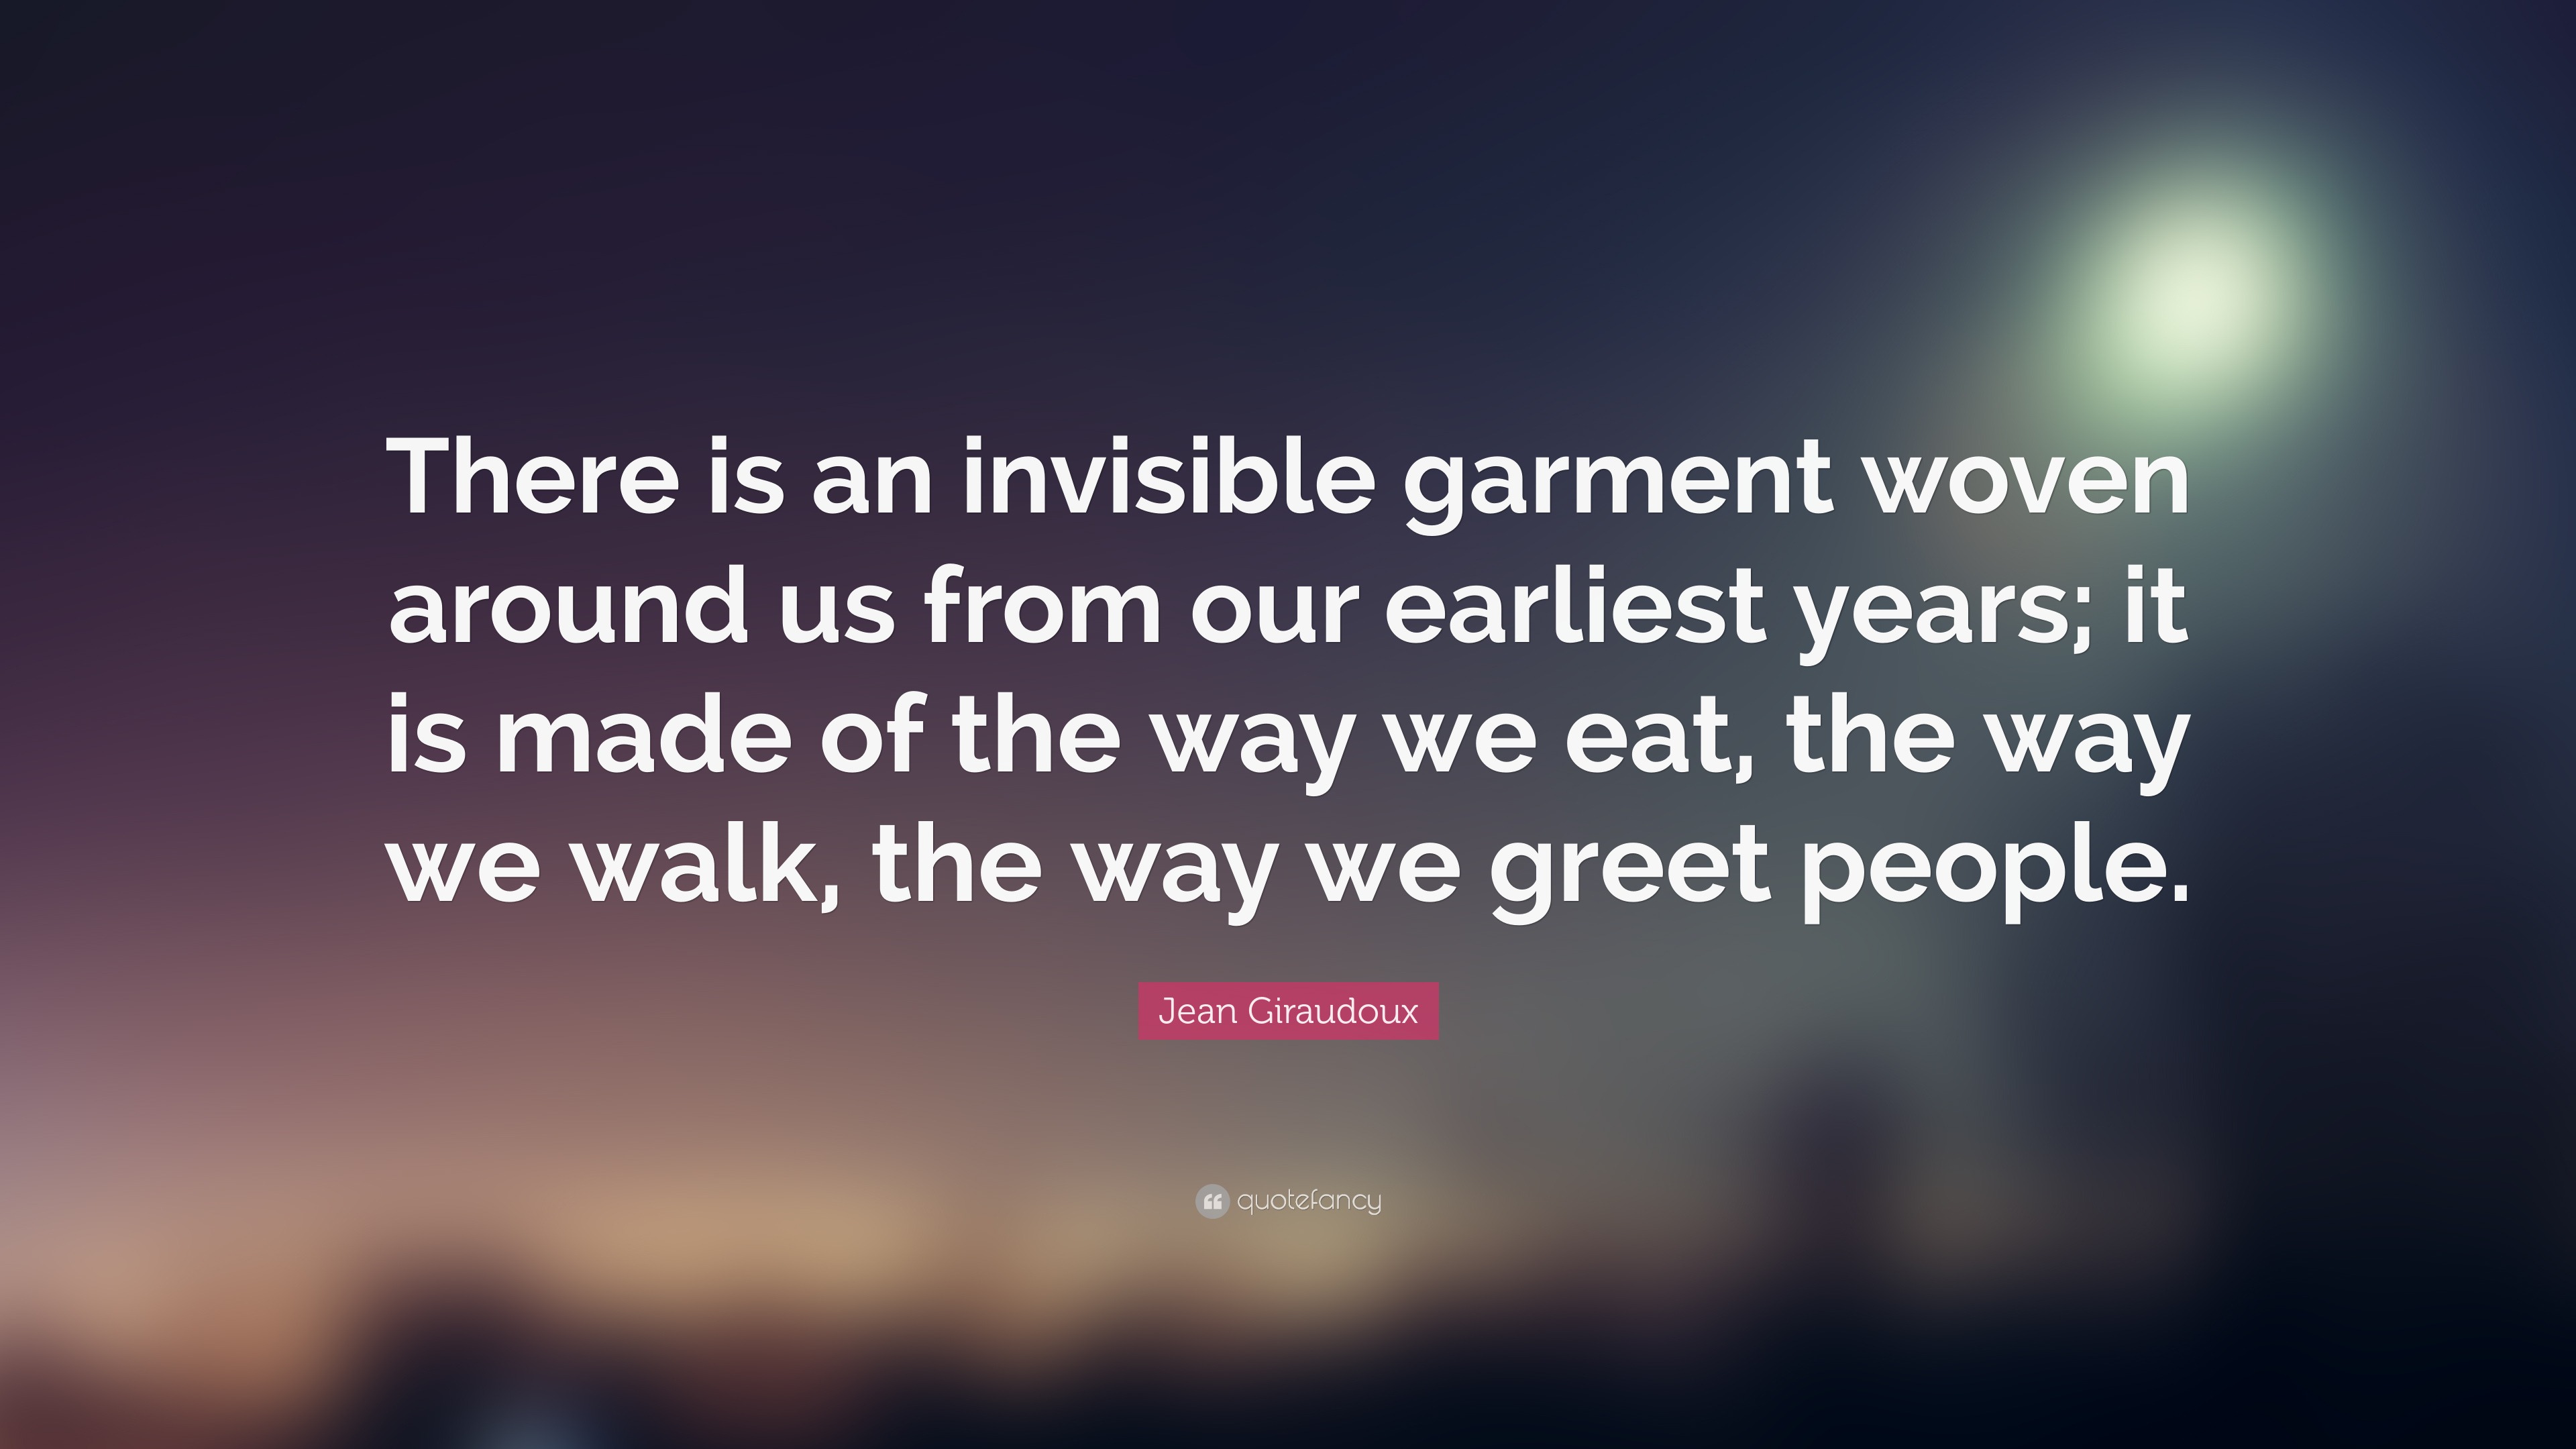 Jean Giraudoux Quote: “There is an invisible garment woven around